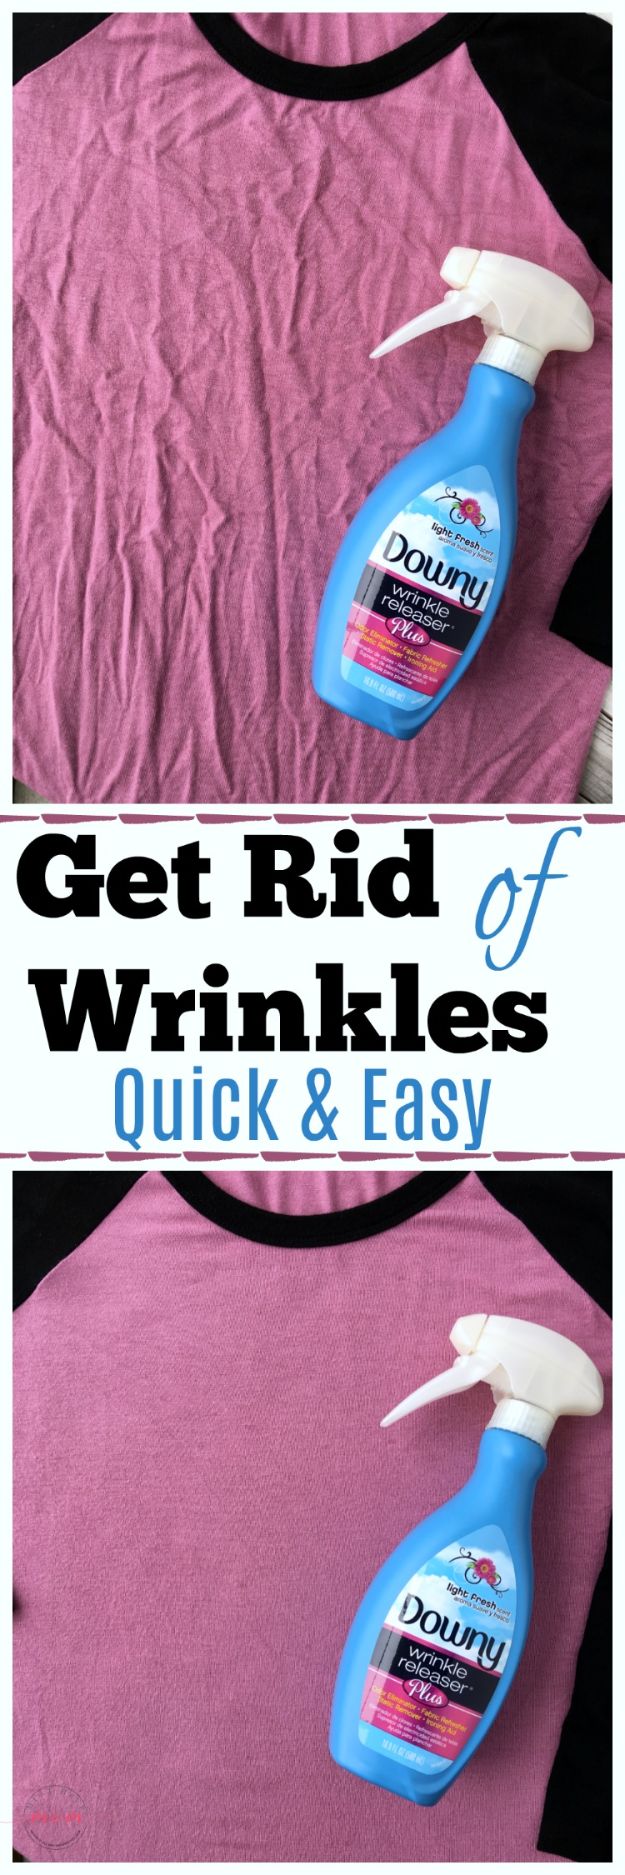 Laundry Hacks - Get Rid of Wrinkles Quick And Easy - Cool Tips for Busy Moms and Laundry Lifehacks - Laundry Room Organizing Ideas, Storage and Makeover - Folding, Drying, Cleaning and Stain Removal Tips for Clothes - How to Remove Stains, Paint, Ink and Smells - Whitening Tricks and Solutions - DIY Products and Recipes for Clothing Soaps 